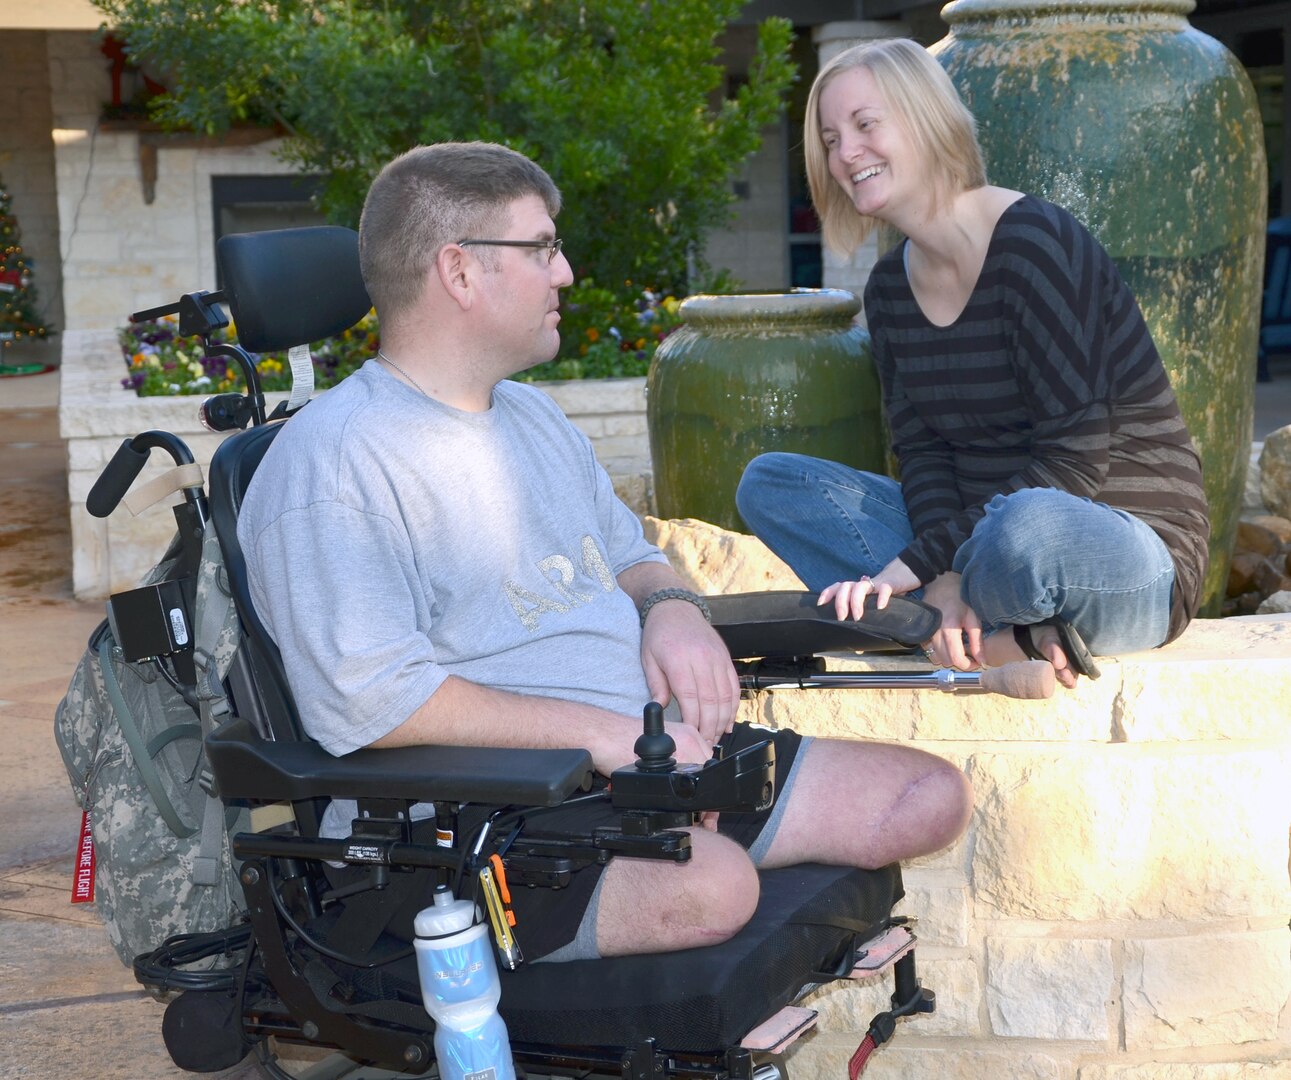 Sgt. Ed Matayka spends a quiet moment with his wife, Karen, at the Warrior and Family Support Center near San Antonio Military Medical Center. The Vermont National Guard medic lost both legs and suffered a brain injury after a roadside bomb blew up his vehicle in Afghanistan in July 2010. (Photo by Lori Newman, Joint Base San Antonio-Fort Sam Houston Public Affairs)